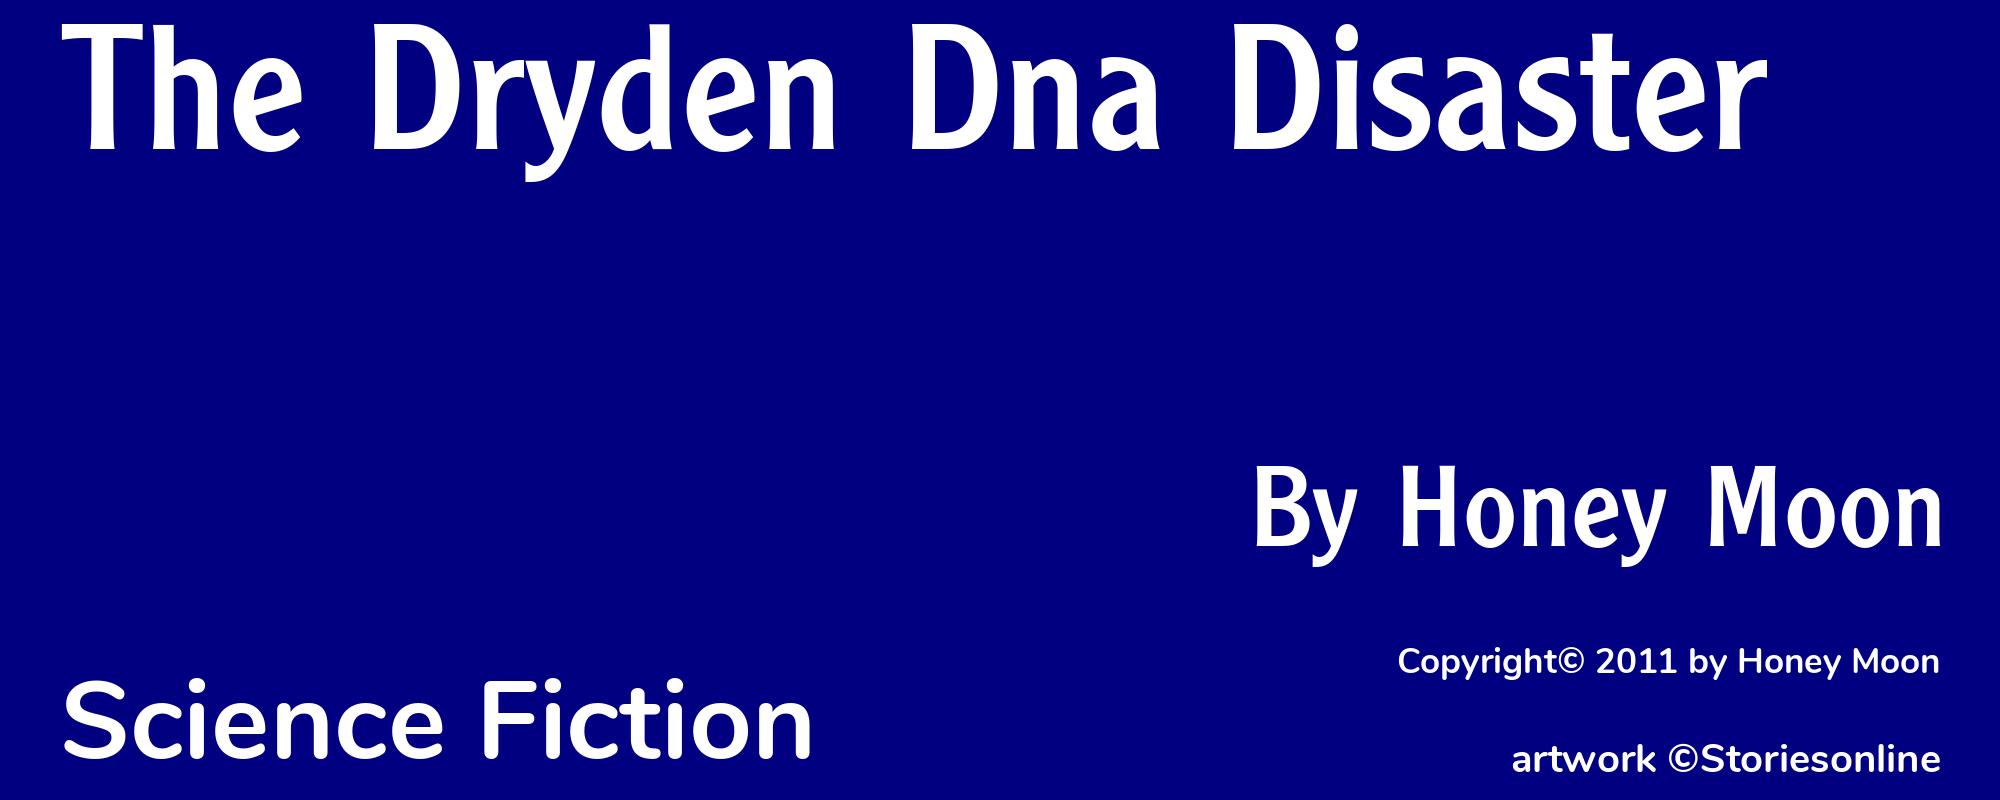 The Dryden Dna Disaster - Cover